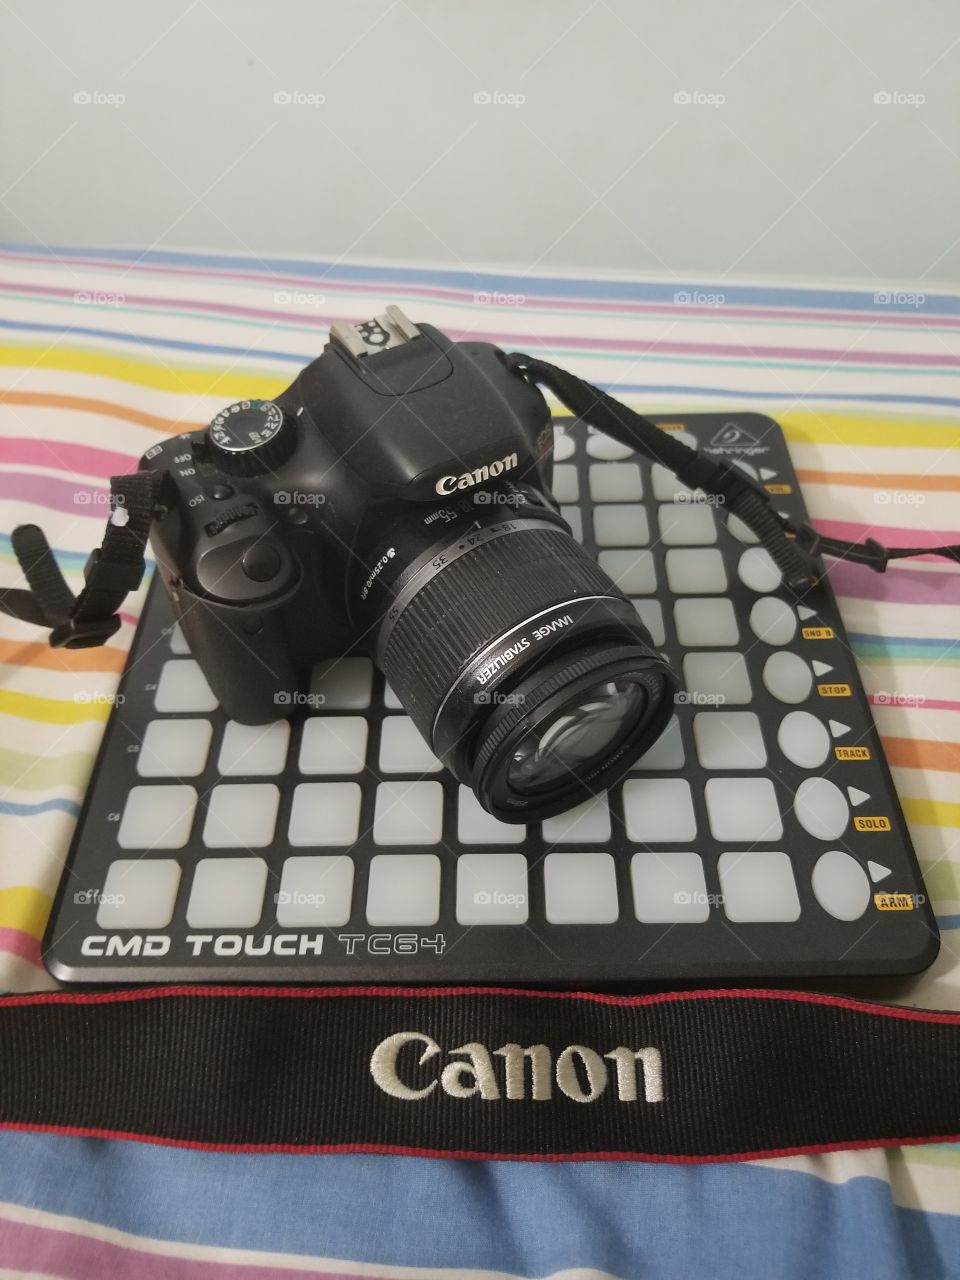 Canon Camera and Launchpad